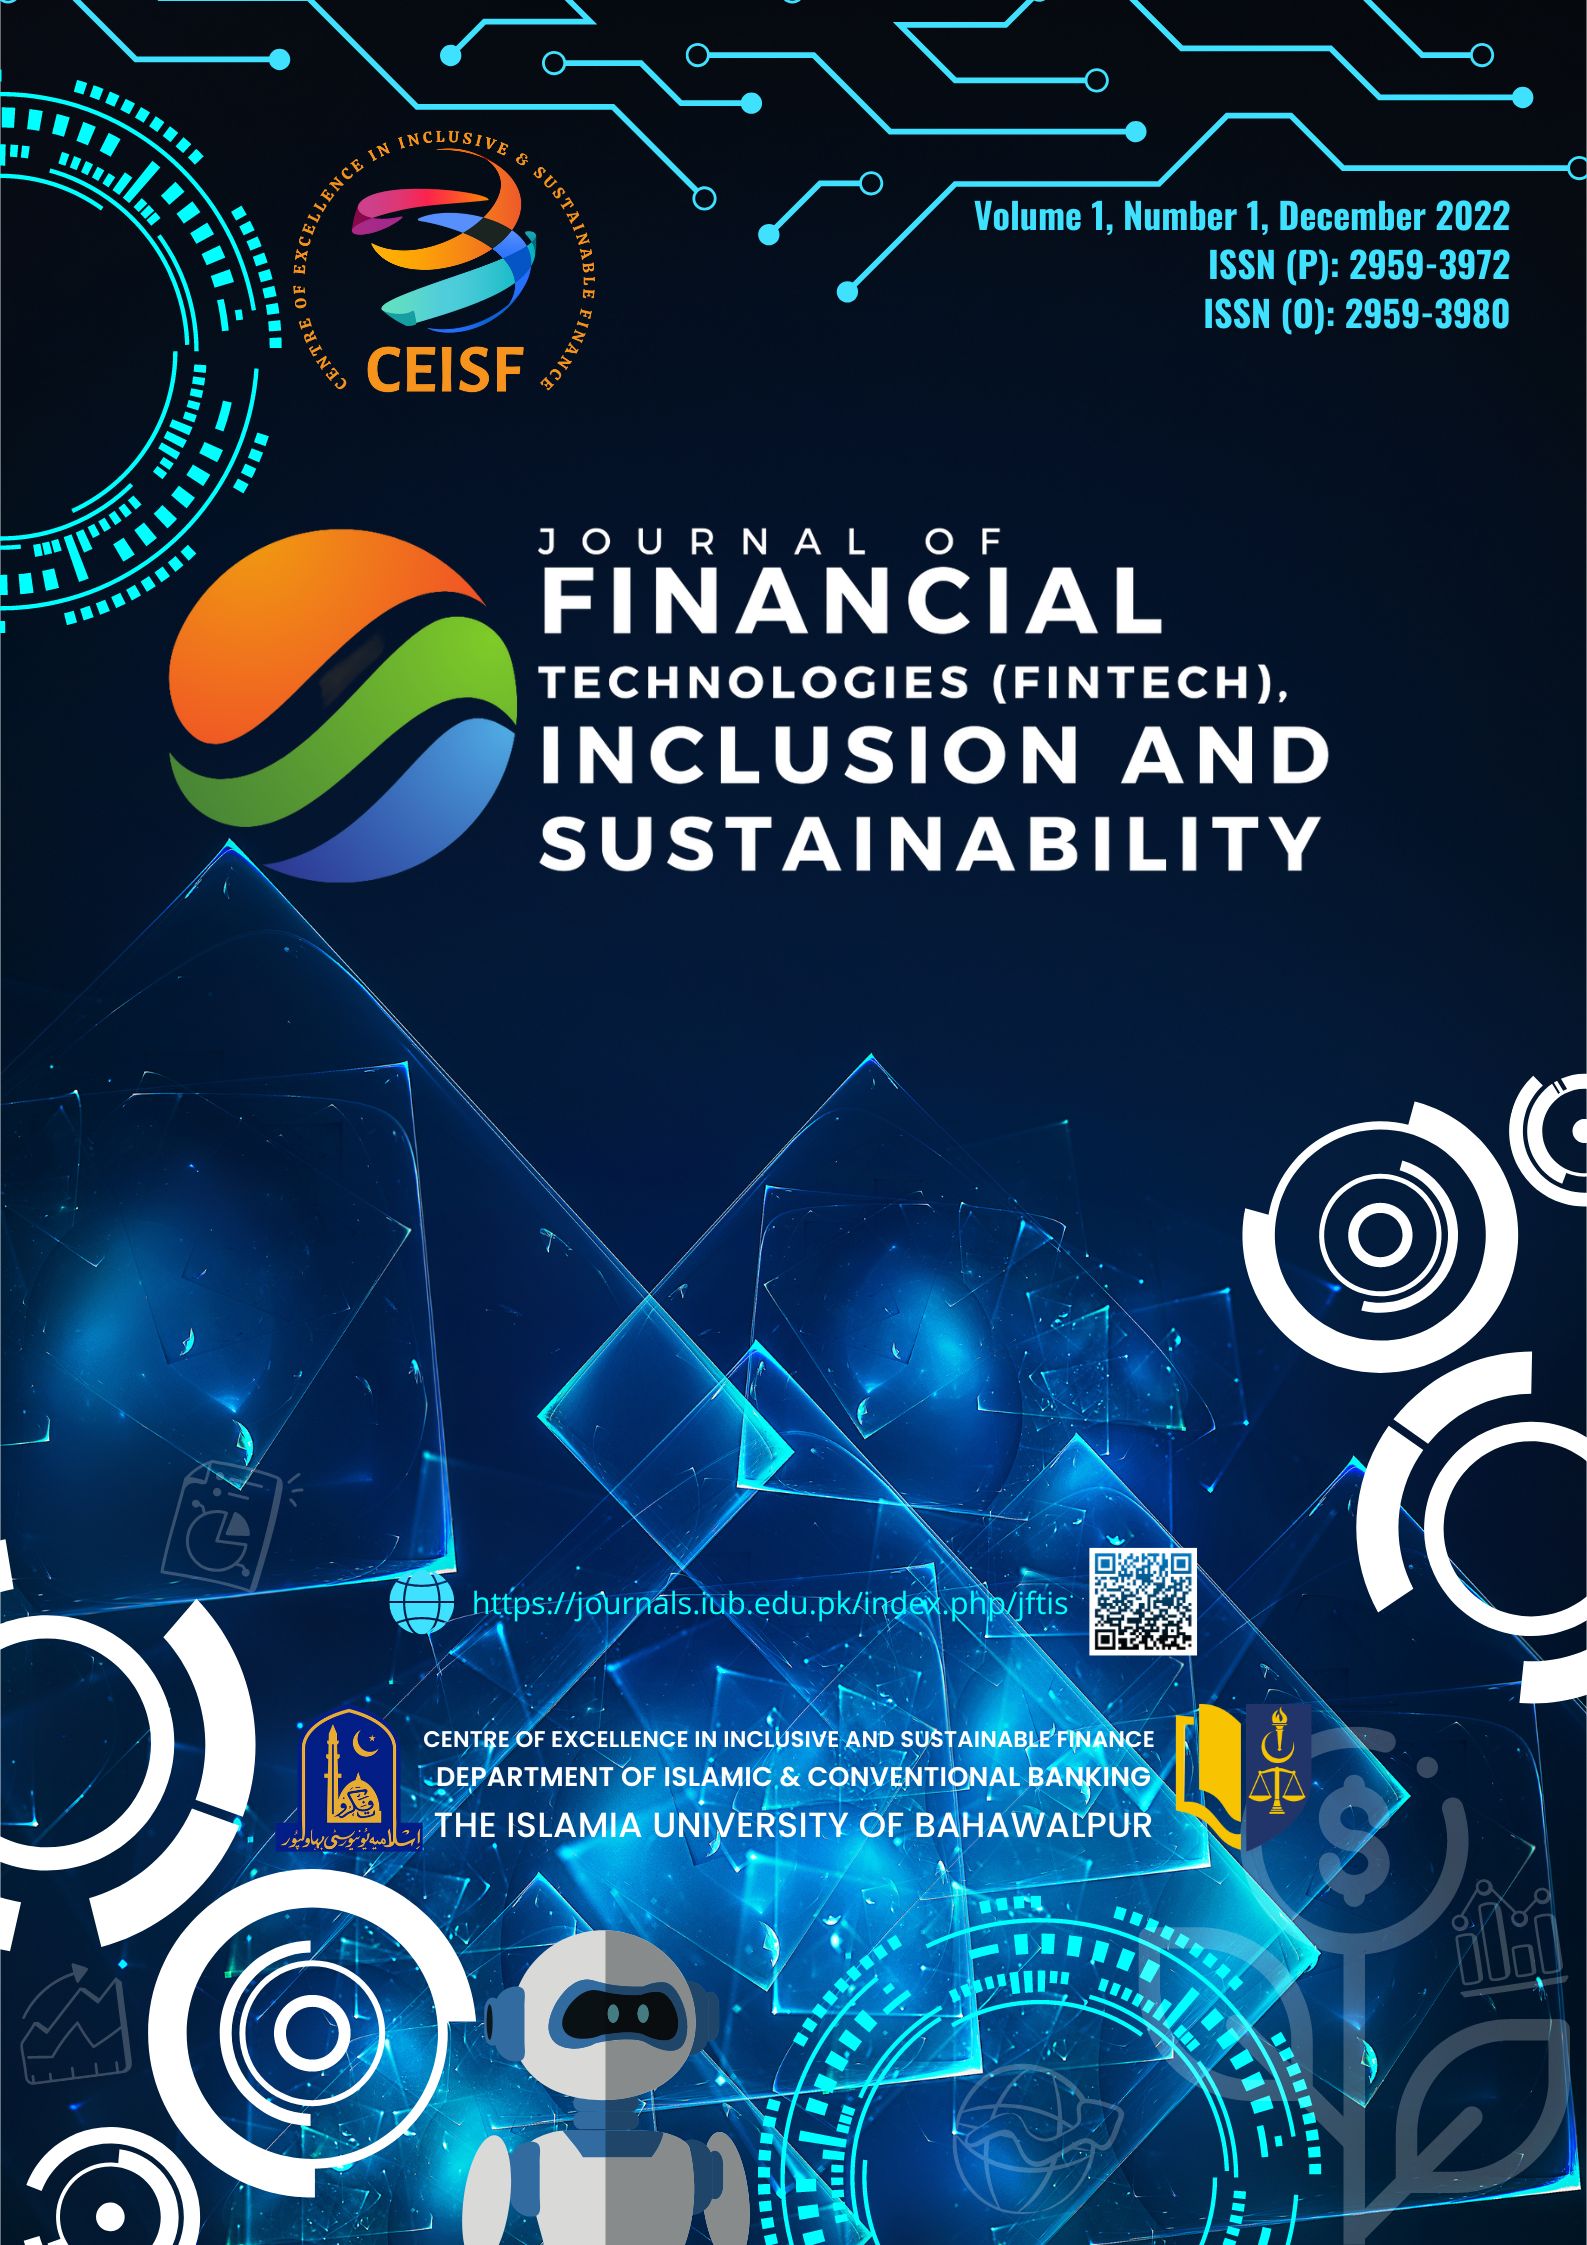 Journal of Financial Technologies (Fintech), Inclusion and Sustainability (JFTIS)